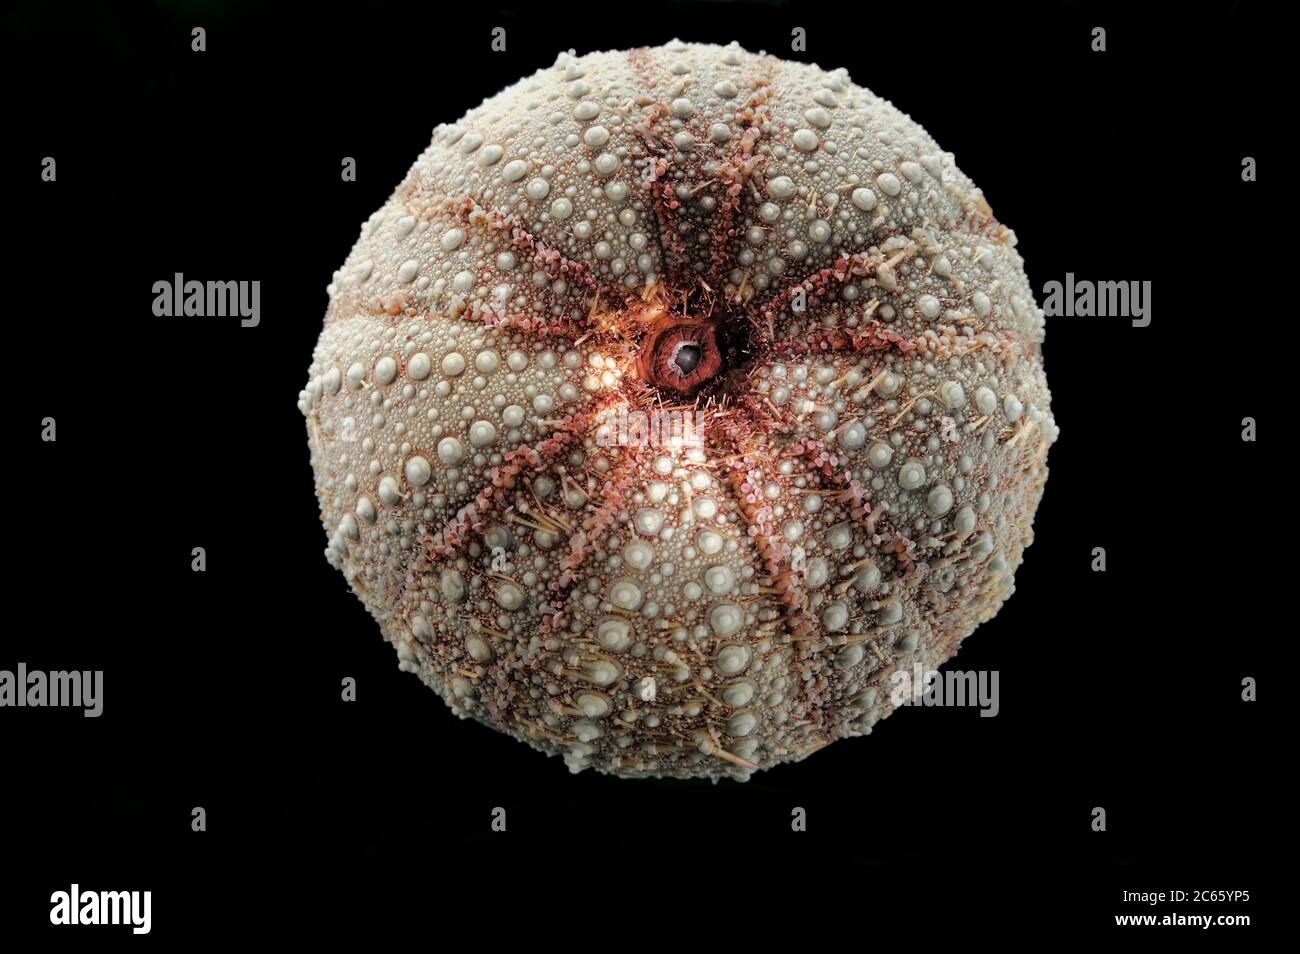 Sea Urchin (Dermechinus horridus) Picture was taken in cooperation with the Zoological Museum University of Hamburg Stock Photo